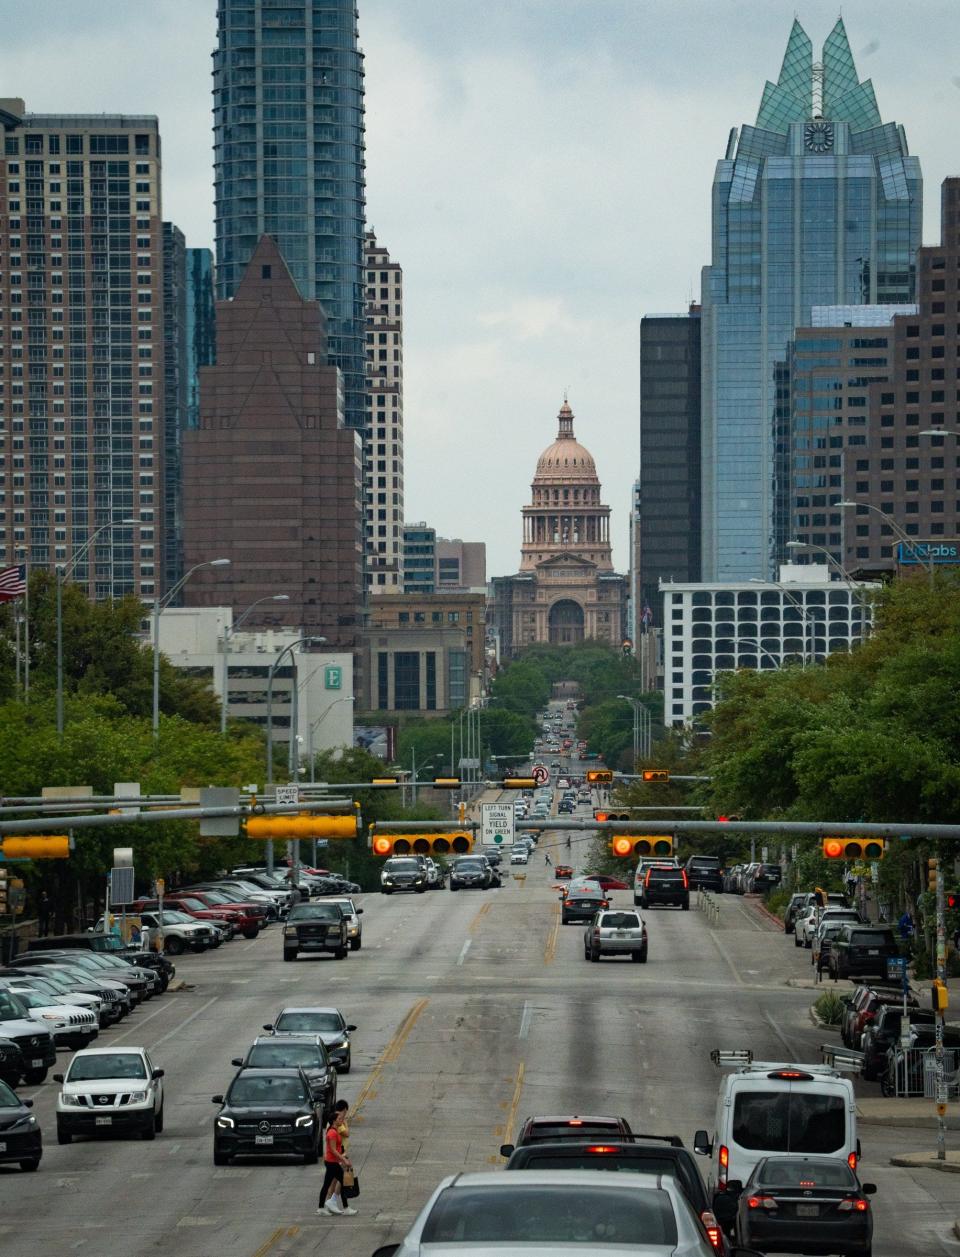 Of the three categories used to compile Resonance's top 100 cities list, Austin did best under Prosperity, coming in at No. 29 in that category.